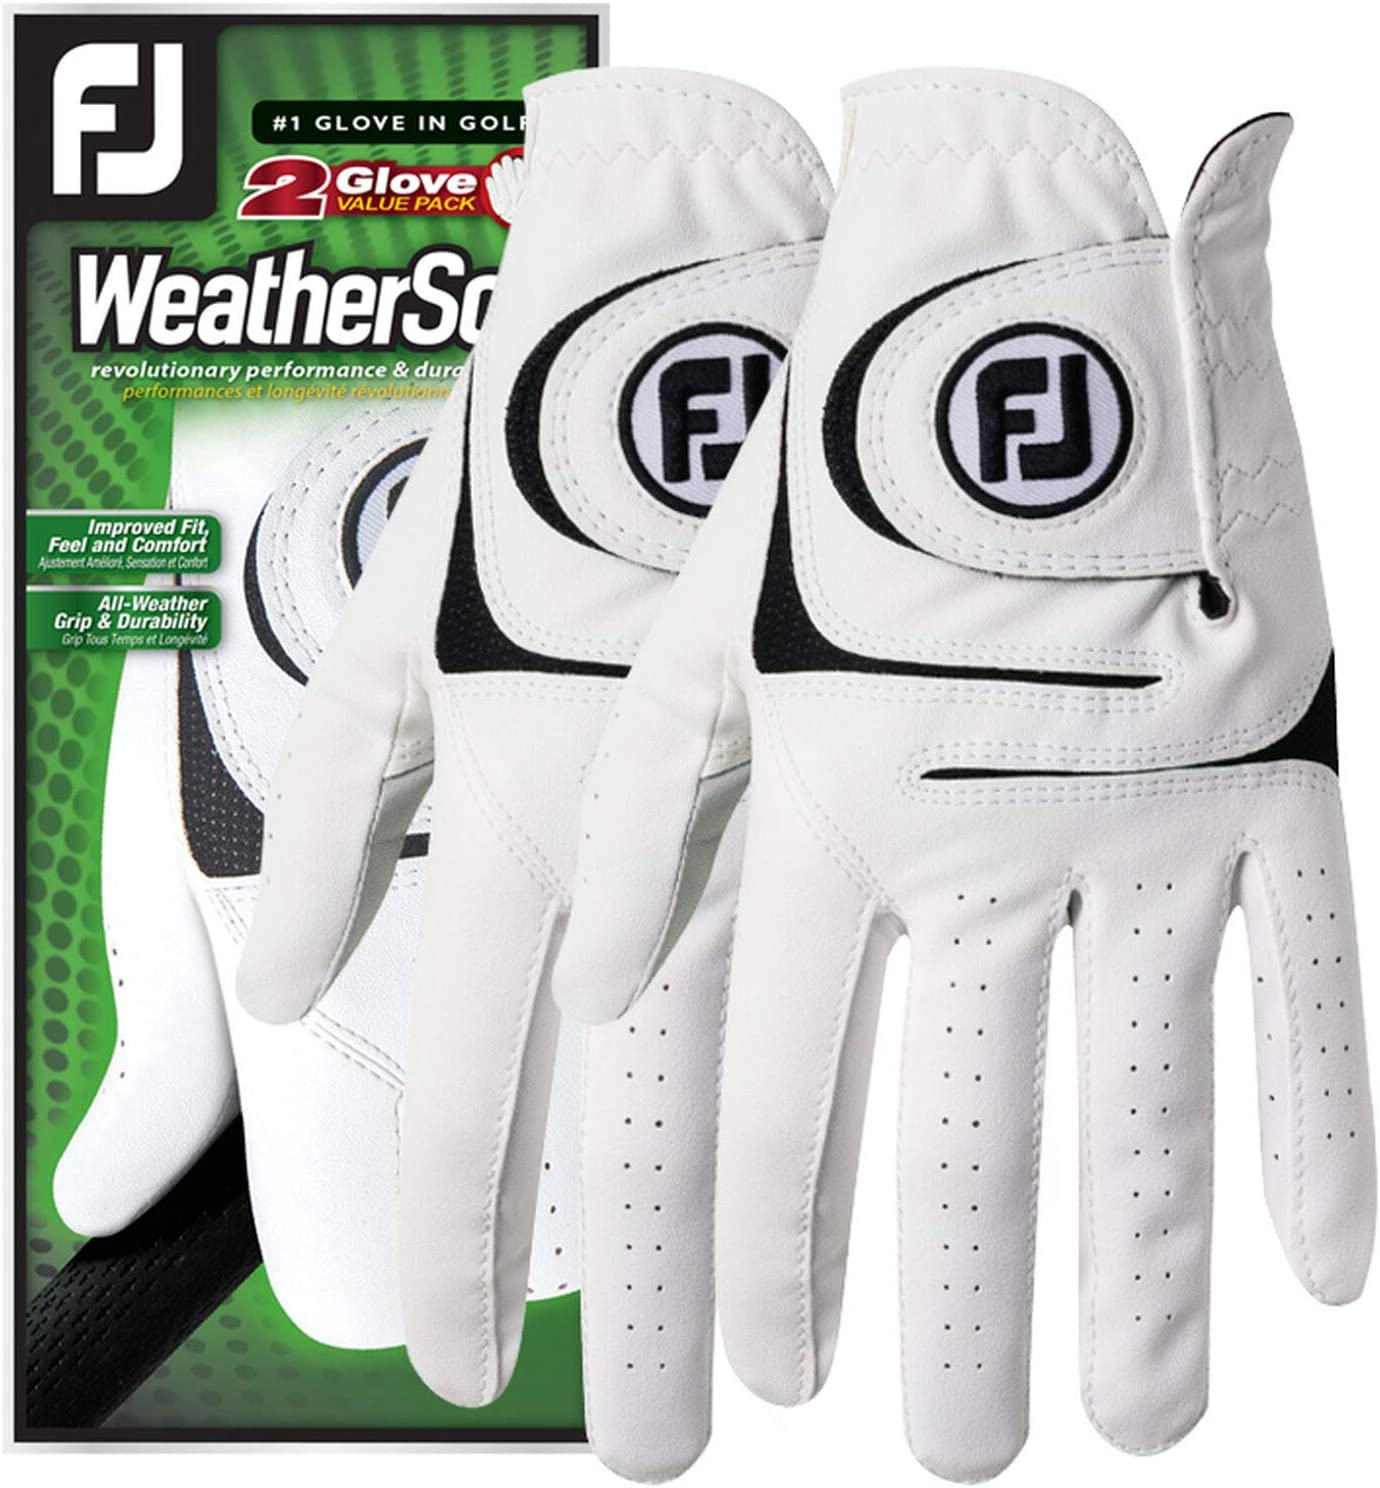 Review of FootJoy Men's WeatherSof Golf Gloves, Pack of 2 (White)